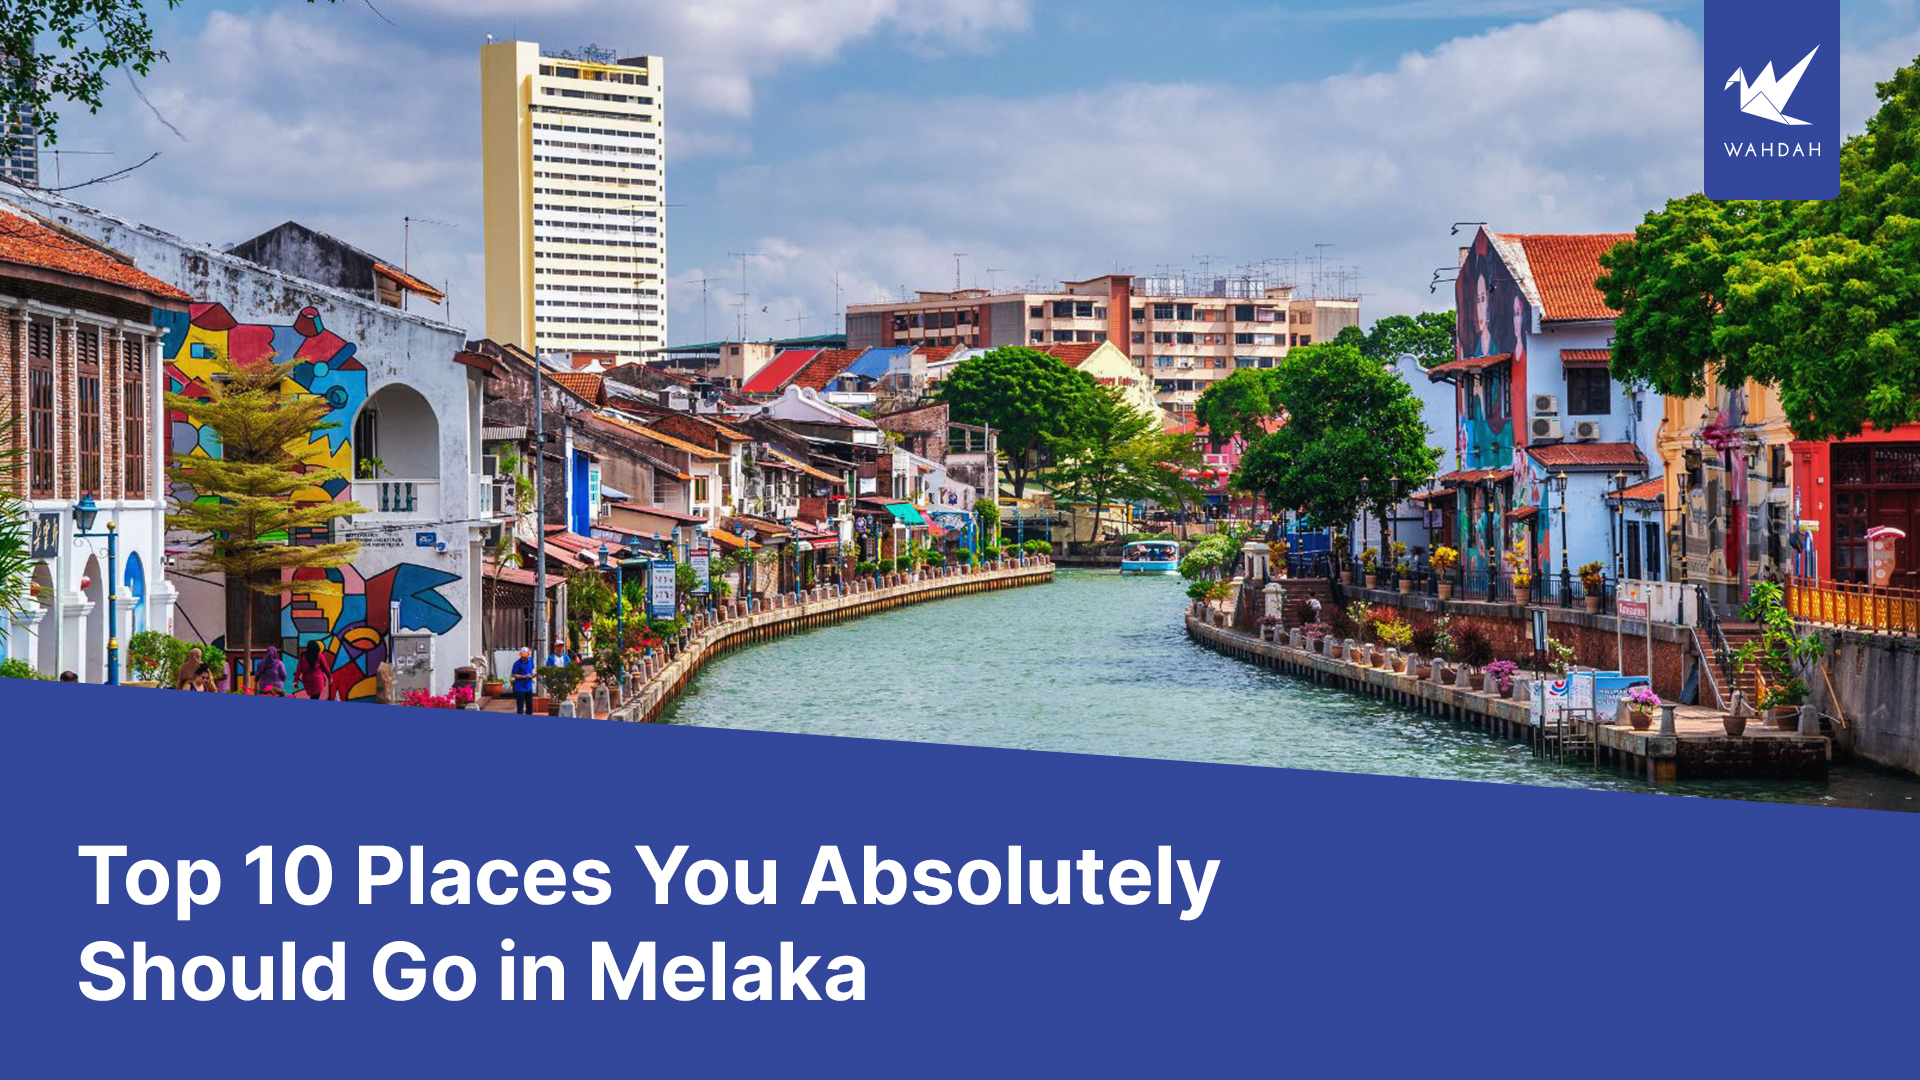 Top 10 Places You Absolutely Should Go in Melaka